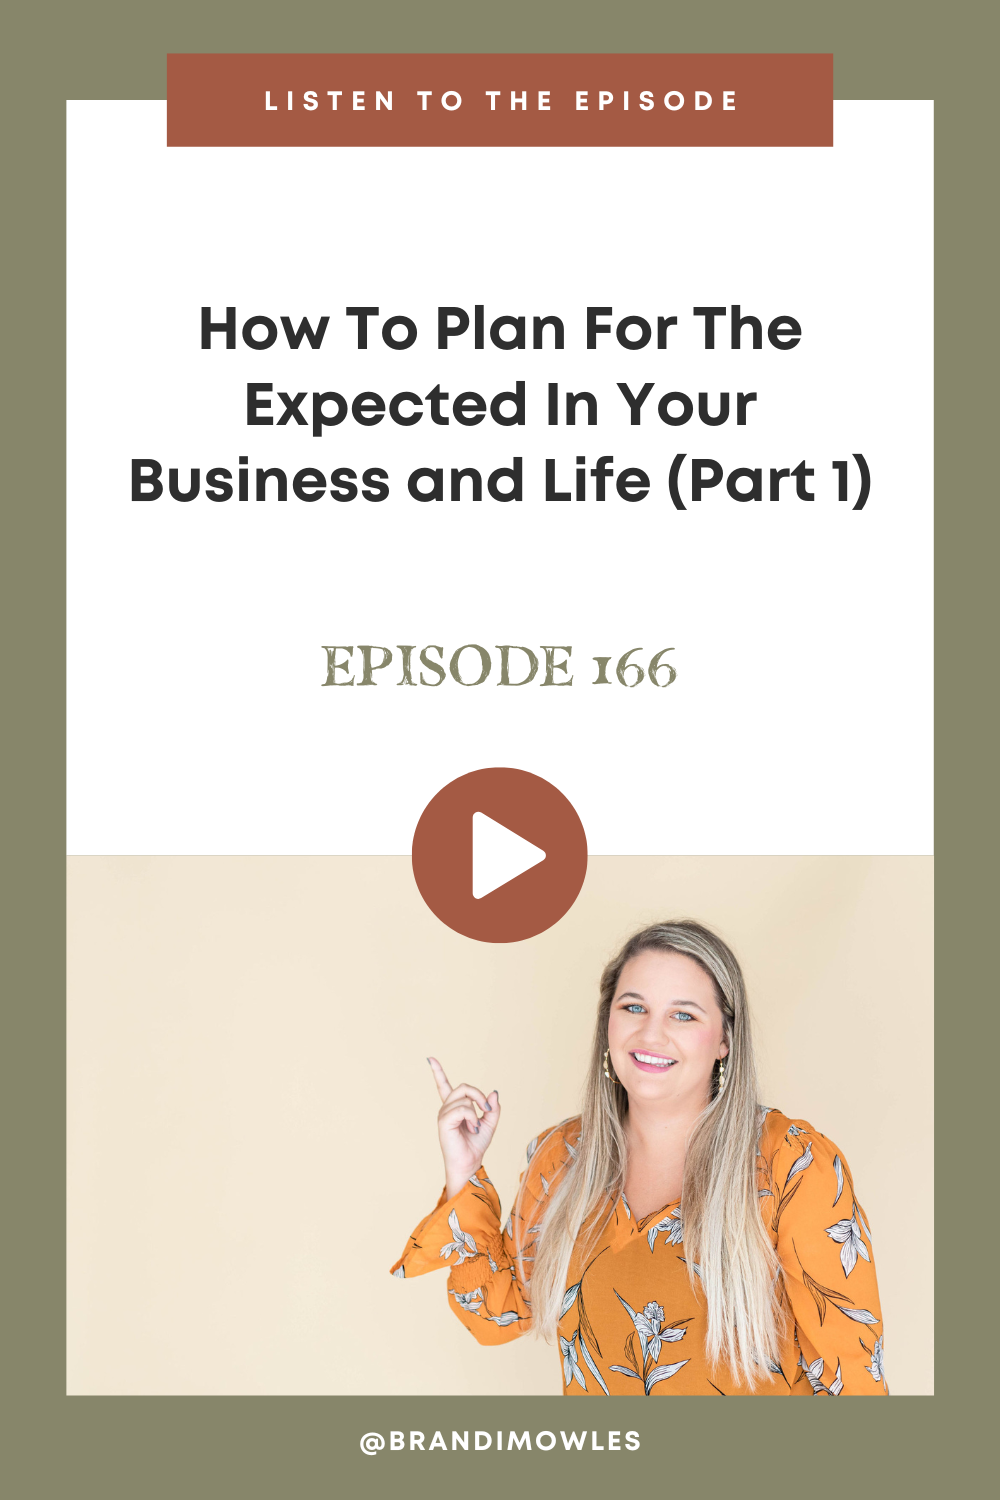 Brandi Mowles podcast episode feature about planning for your business